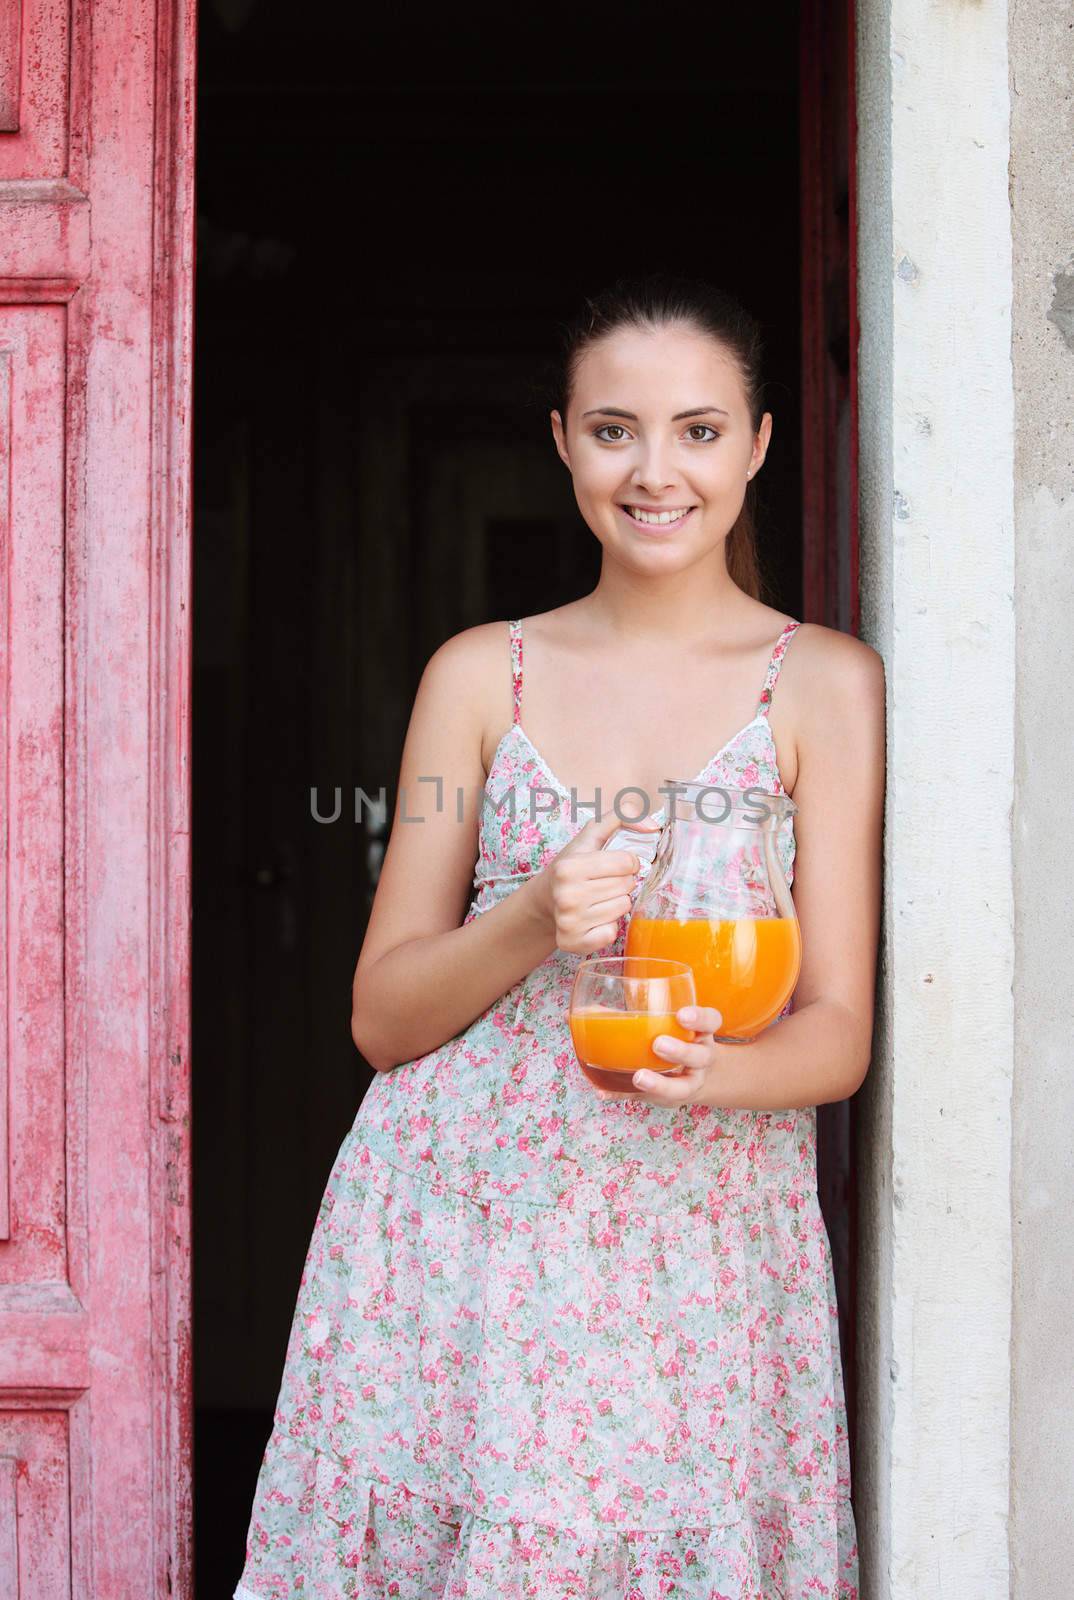 Young smiling woman with orange juice